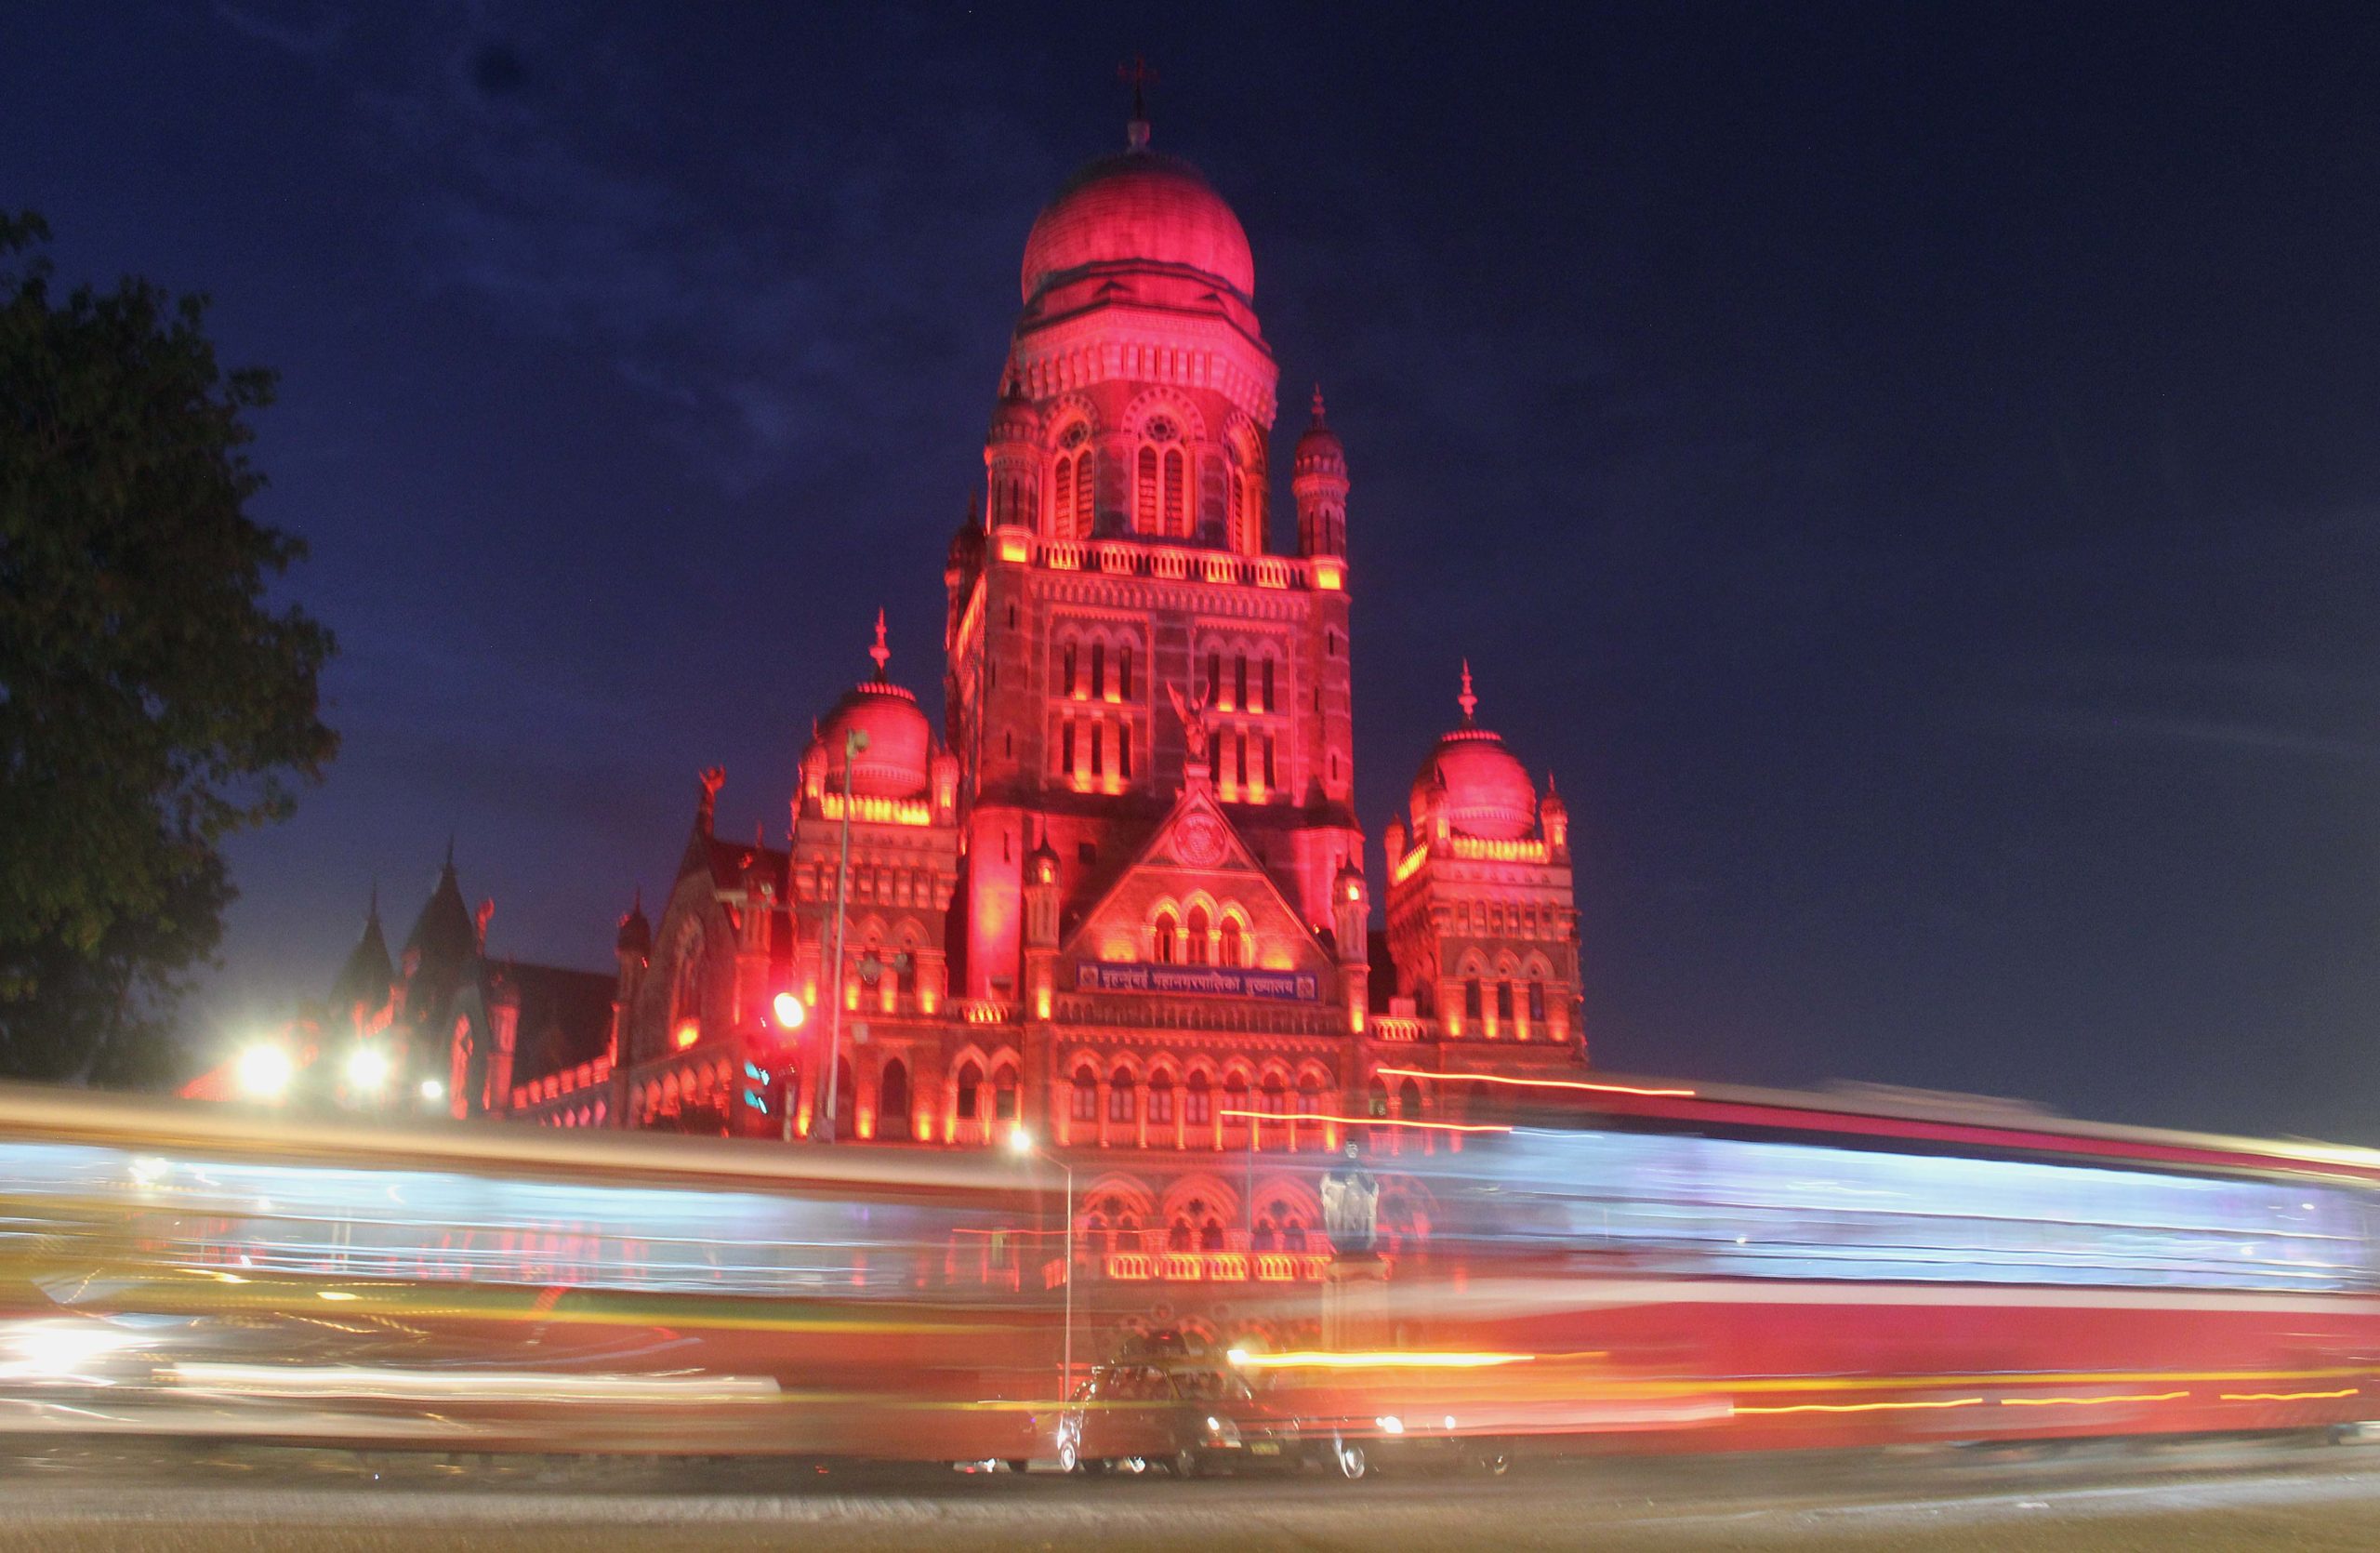 BMC Pins Loss Of Real-Estate Revenue On MHADA. - Square Feat India